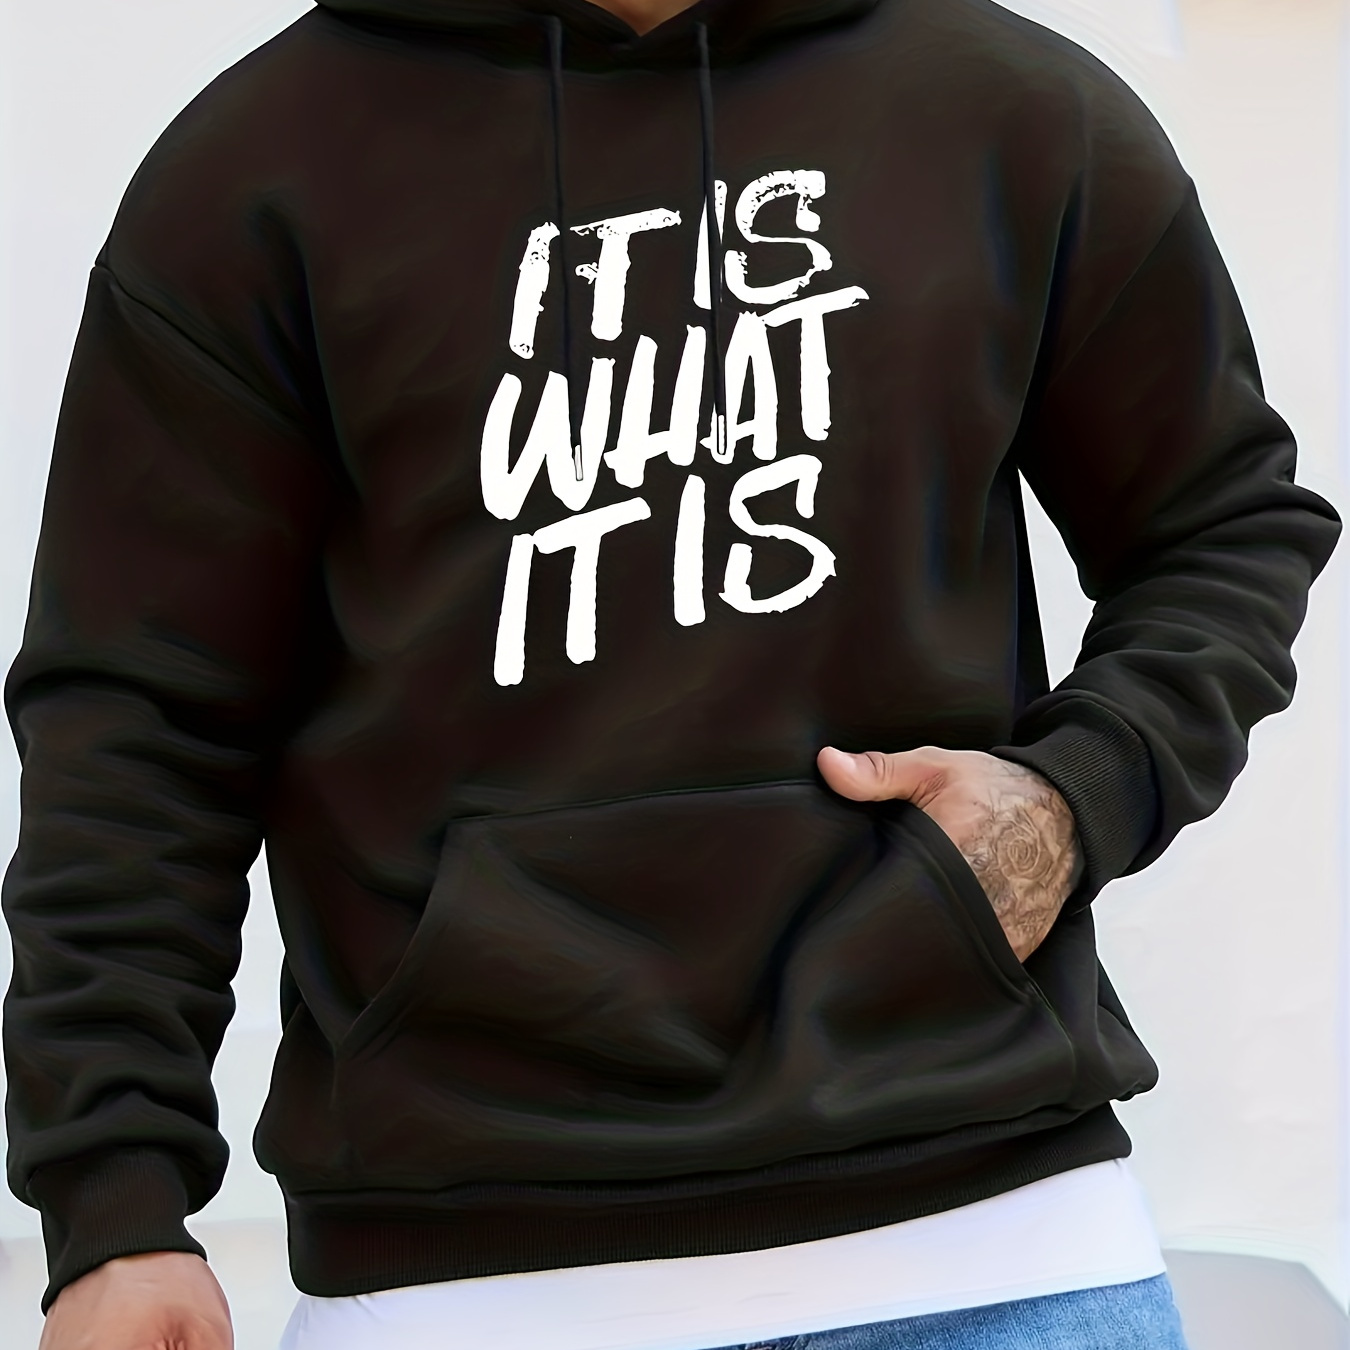 

"it Is What It Is" Print, Hoodies For Men, Graphic Sweatshirt With Kangaroo Pocket, Comfy Trendy Hooded Pullover, Men's Clothing For Fall Winter